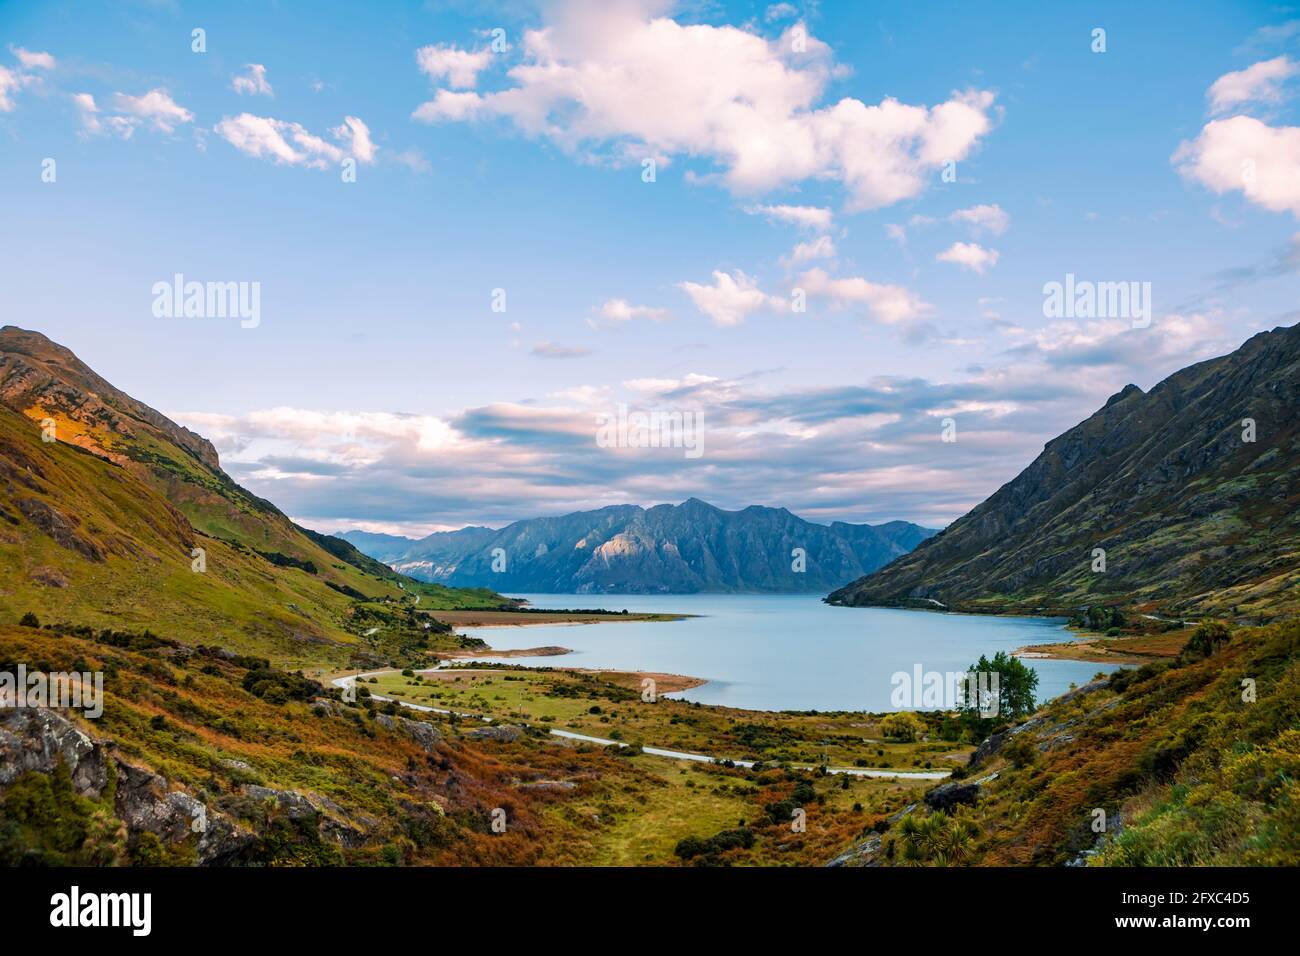 Scenic view of clouds over Lake Hawea and surrounding mountains Stock Photo